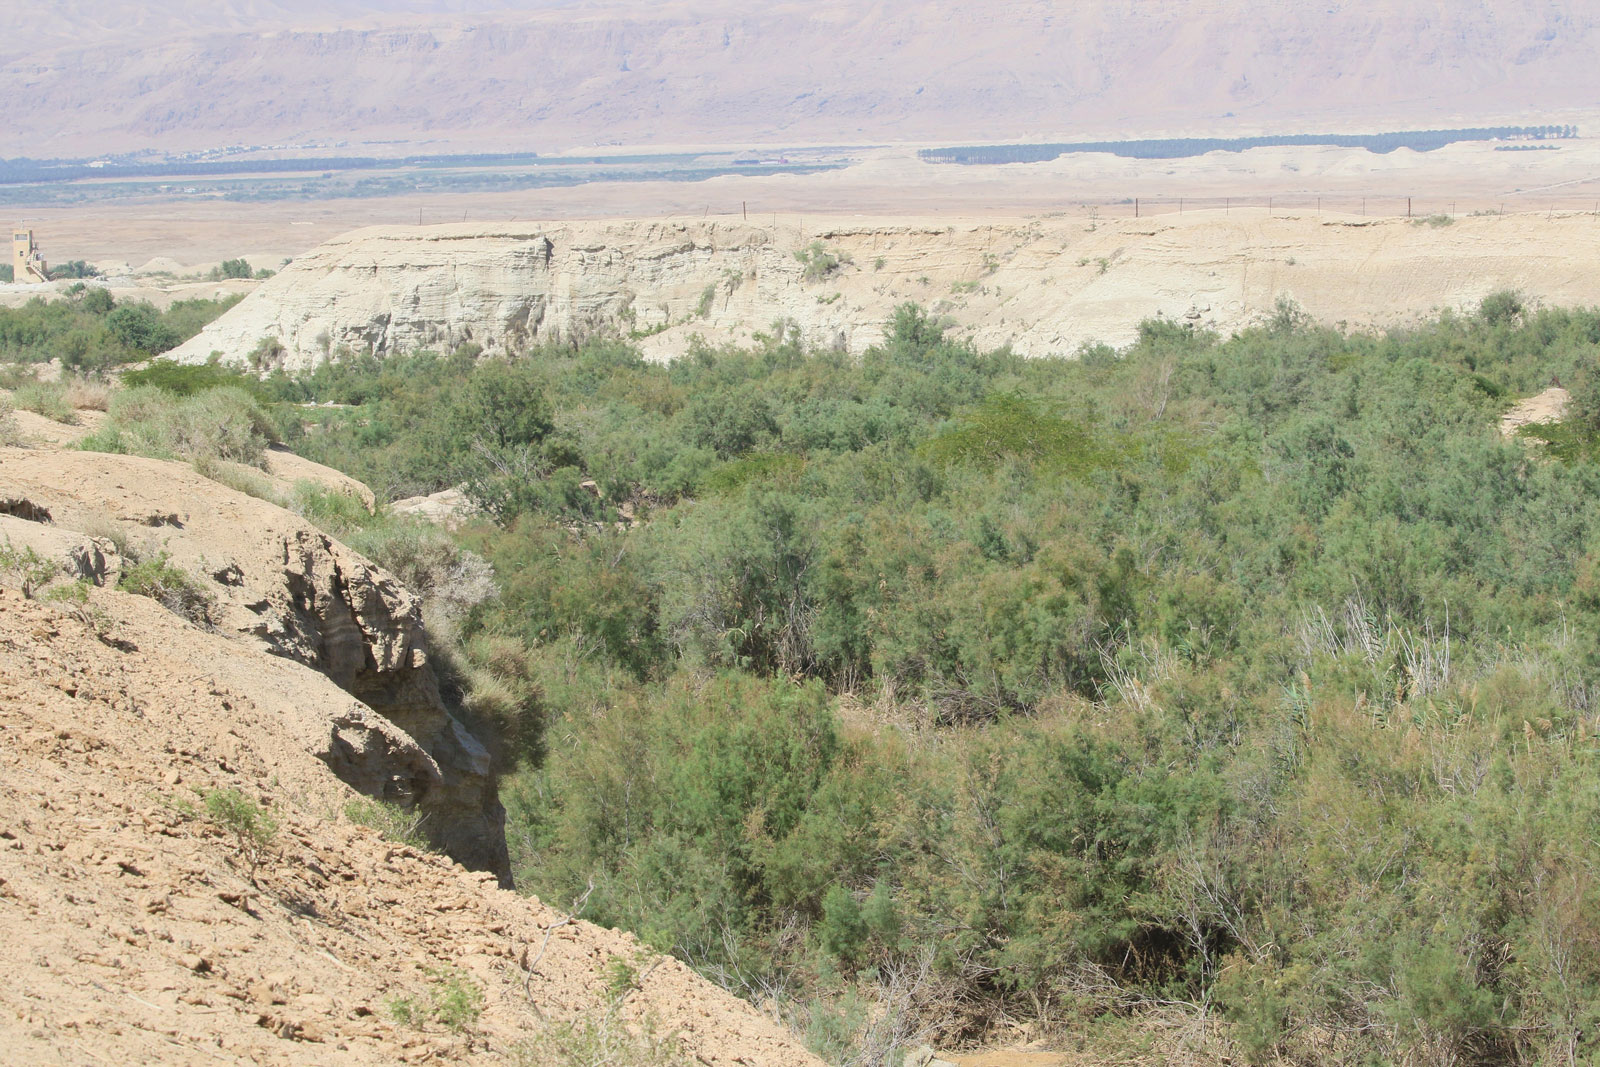 Wadi Gharaba, a special conservation and important bird area in Jordan